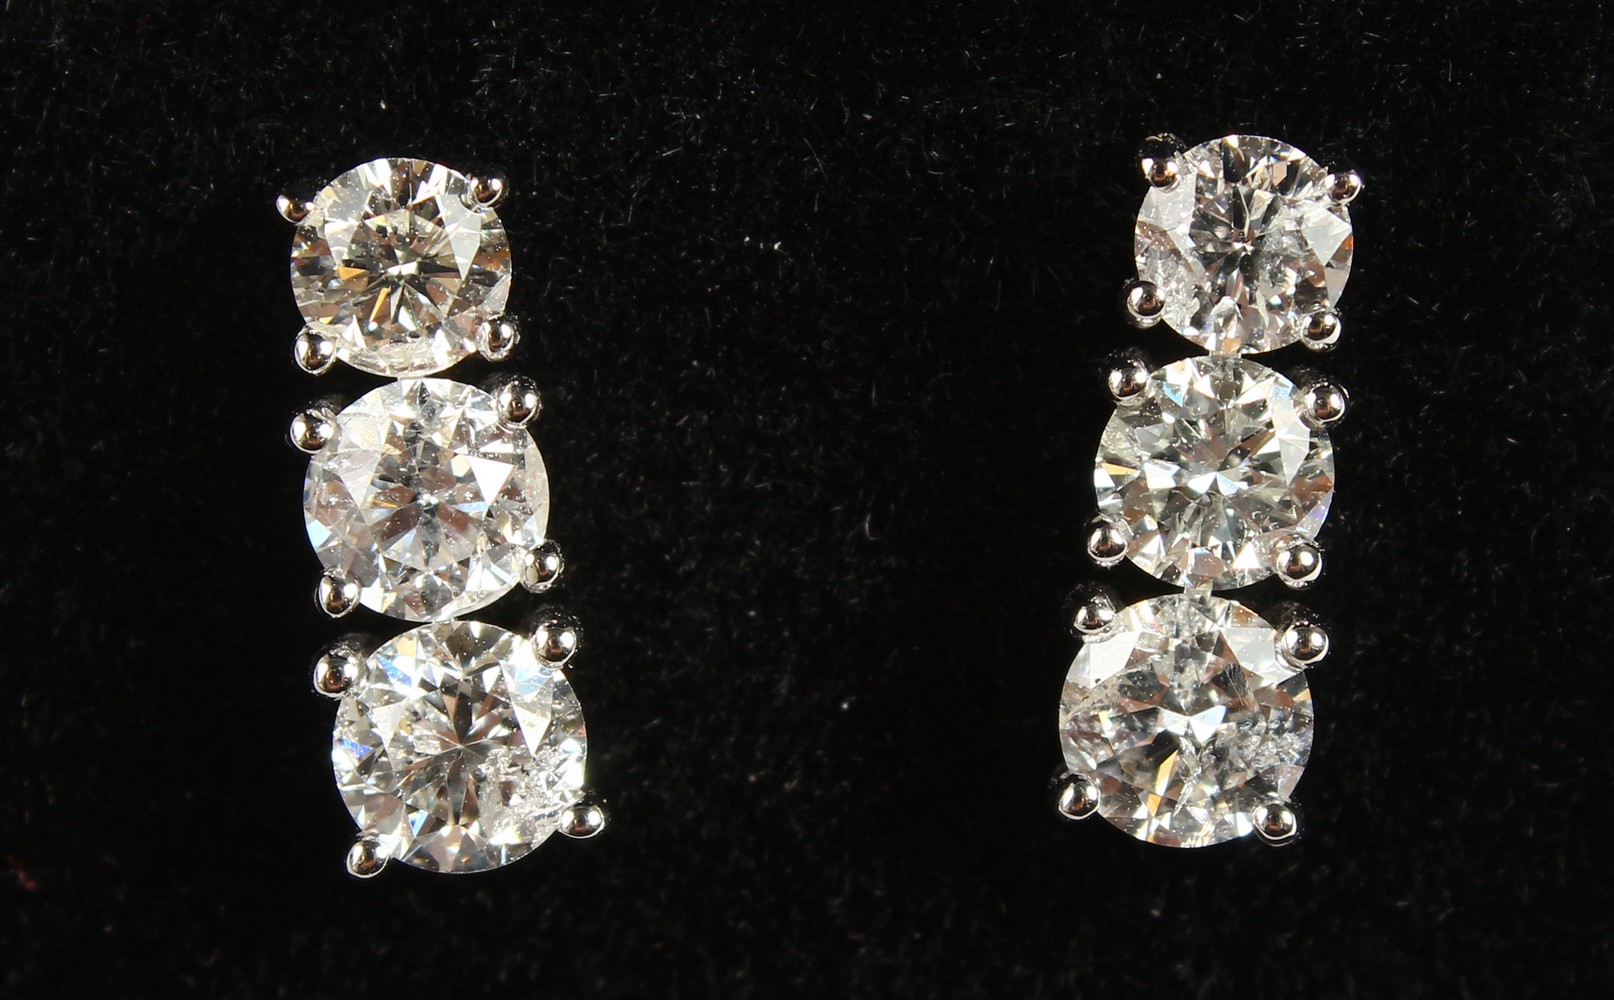 A GOOD PAIR OF 18CT WHITE GOLD THREE-STONE GRADUATED SET OF DIAMOND EARRINGS of 1.9CTS.